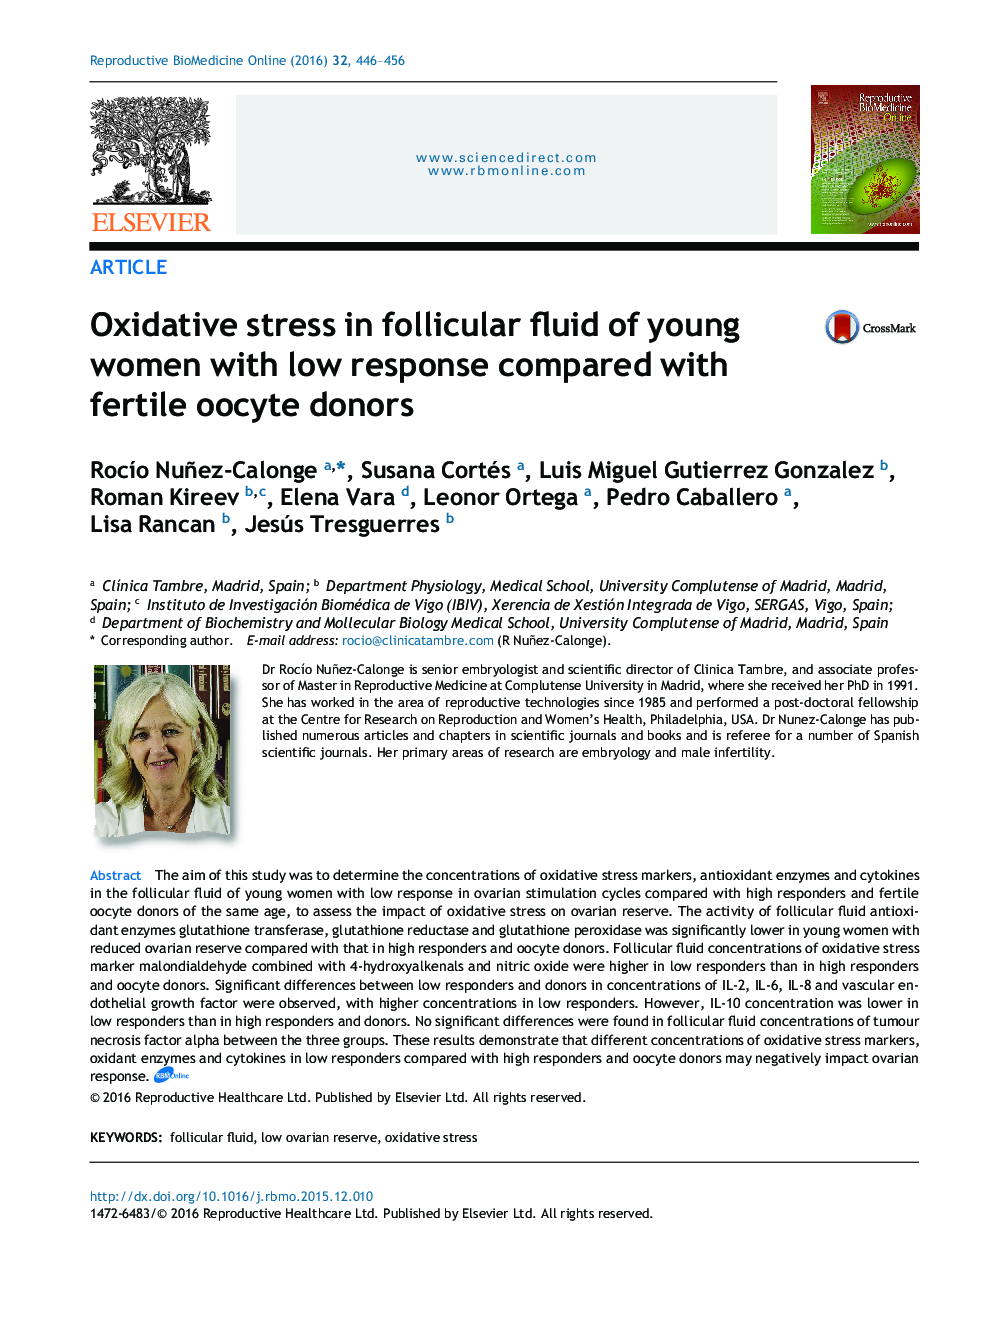 Oxidative stress in follicular fluid of young women with low response compared with fertile oocyte donors